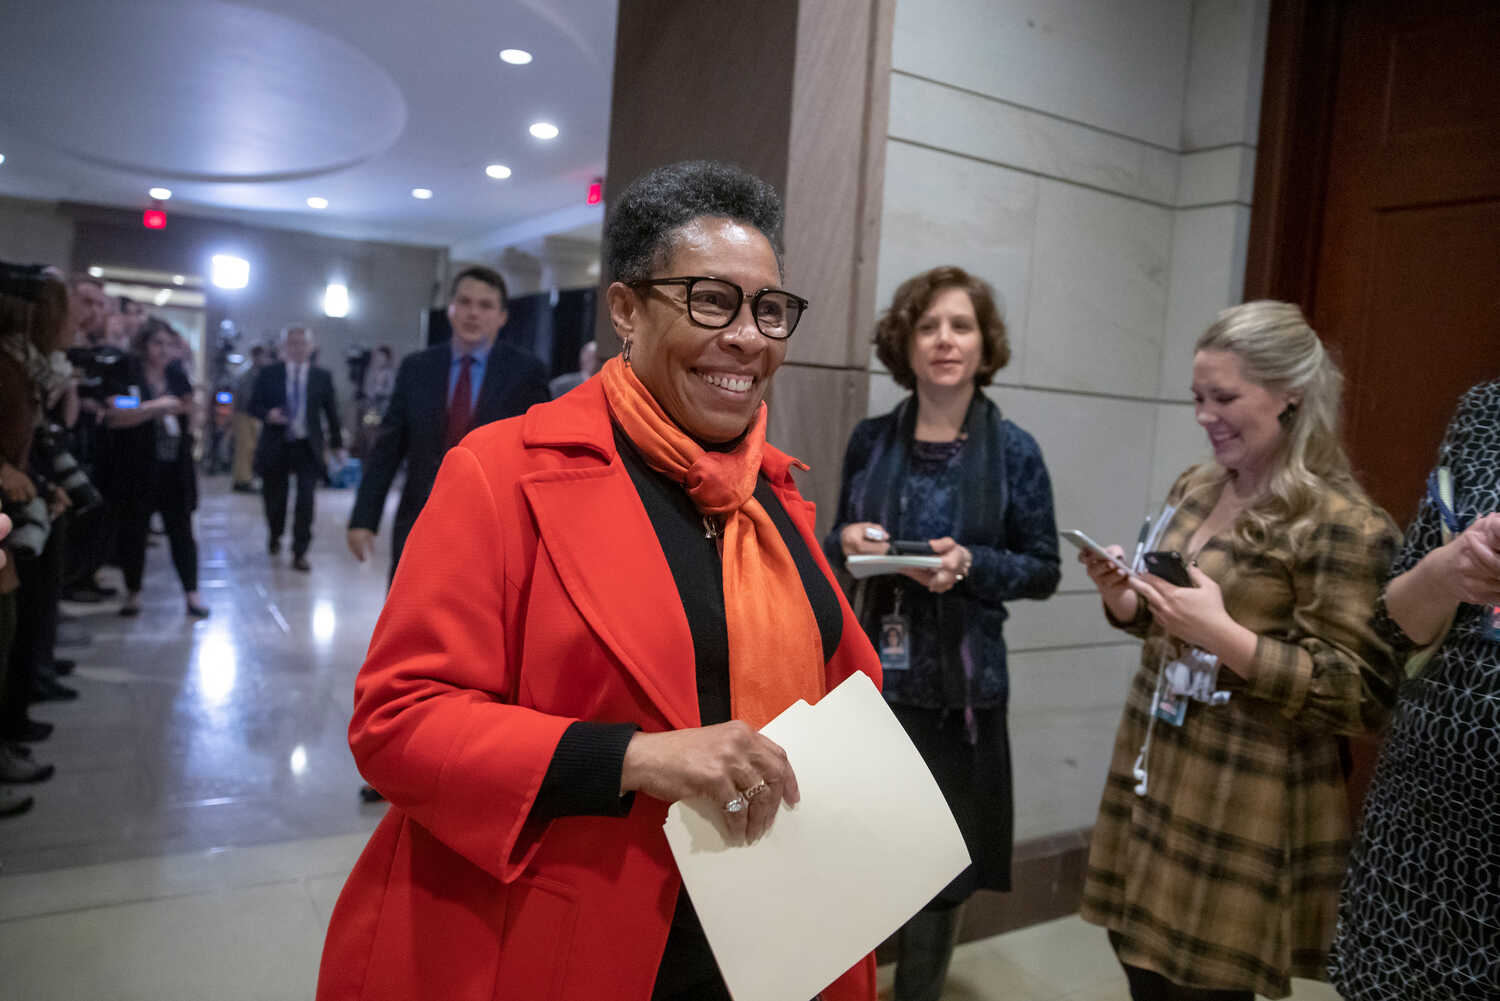 Representative Marcia L. Fudge of Ohio in 2018. Representative James E. Clyburn of South Carolina, the highest-ranking Black member of Congress and an important Biden ally, is making an all-out case for her to lead the Agriculture Department.